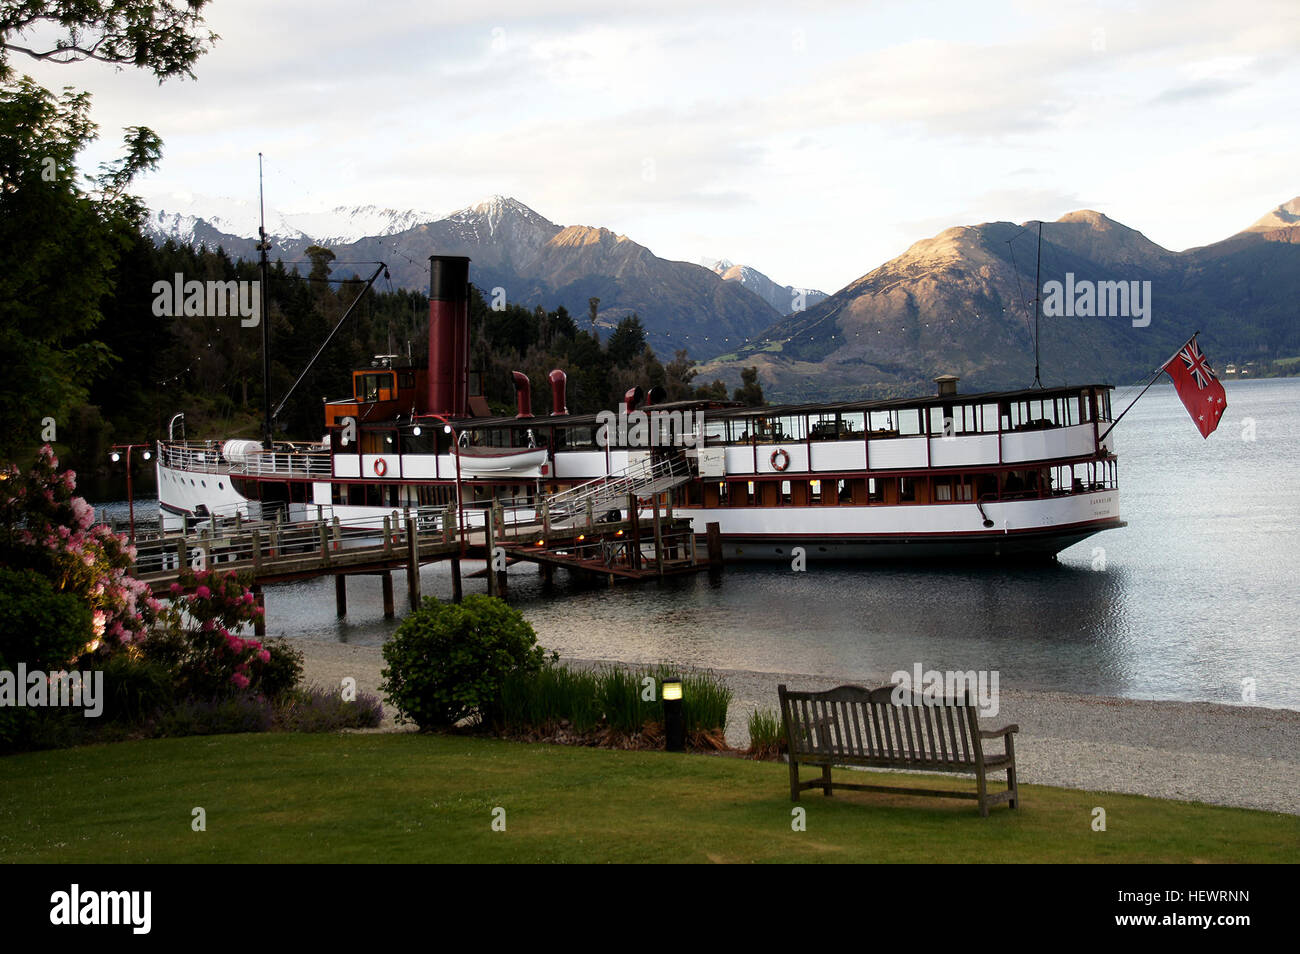 Ication (,,),,, Grand Pacific Tours, Lady of the Lake, Lake Cruise Queenstown, Real Journeys, Walter Dinner und Bauernhof-Tour Cruise Queenstown, Walter Bauernhof Gipfeltour, Walter PeakTSS EarnslawQueenstown. Stockfoto